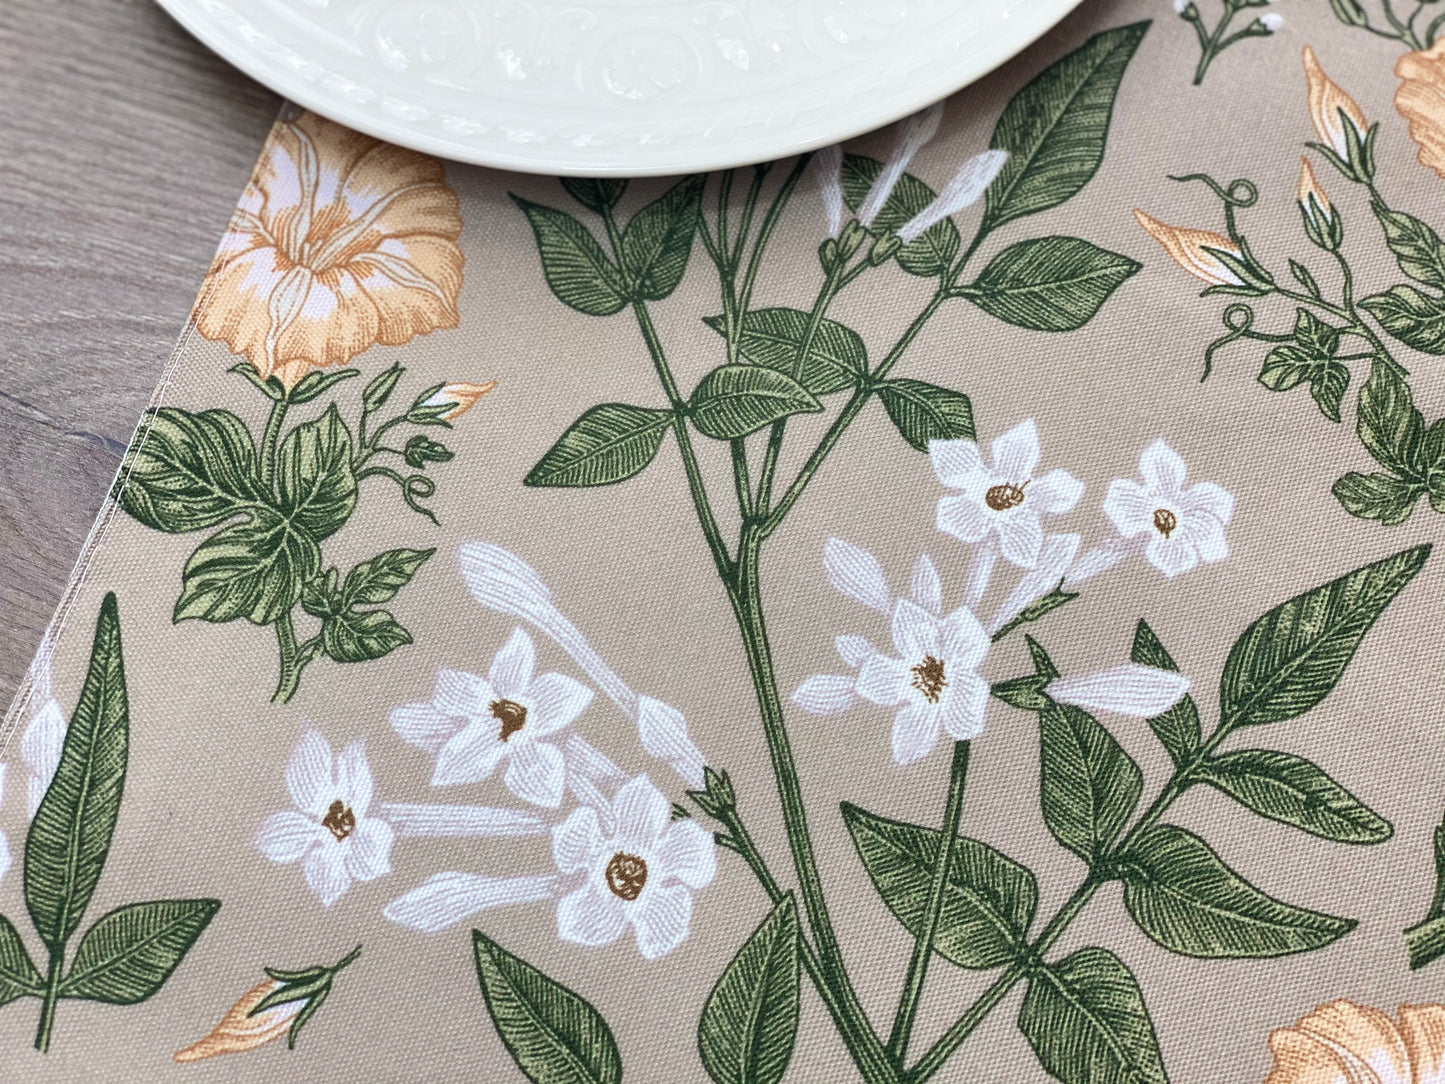 Set of 4 Vintage Flowers Placemat, Petunia Jasmine croton wildflowers Pattern, Washable Cotton Placemat for fall dining table